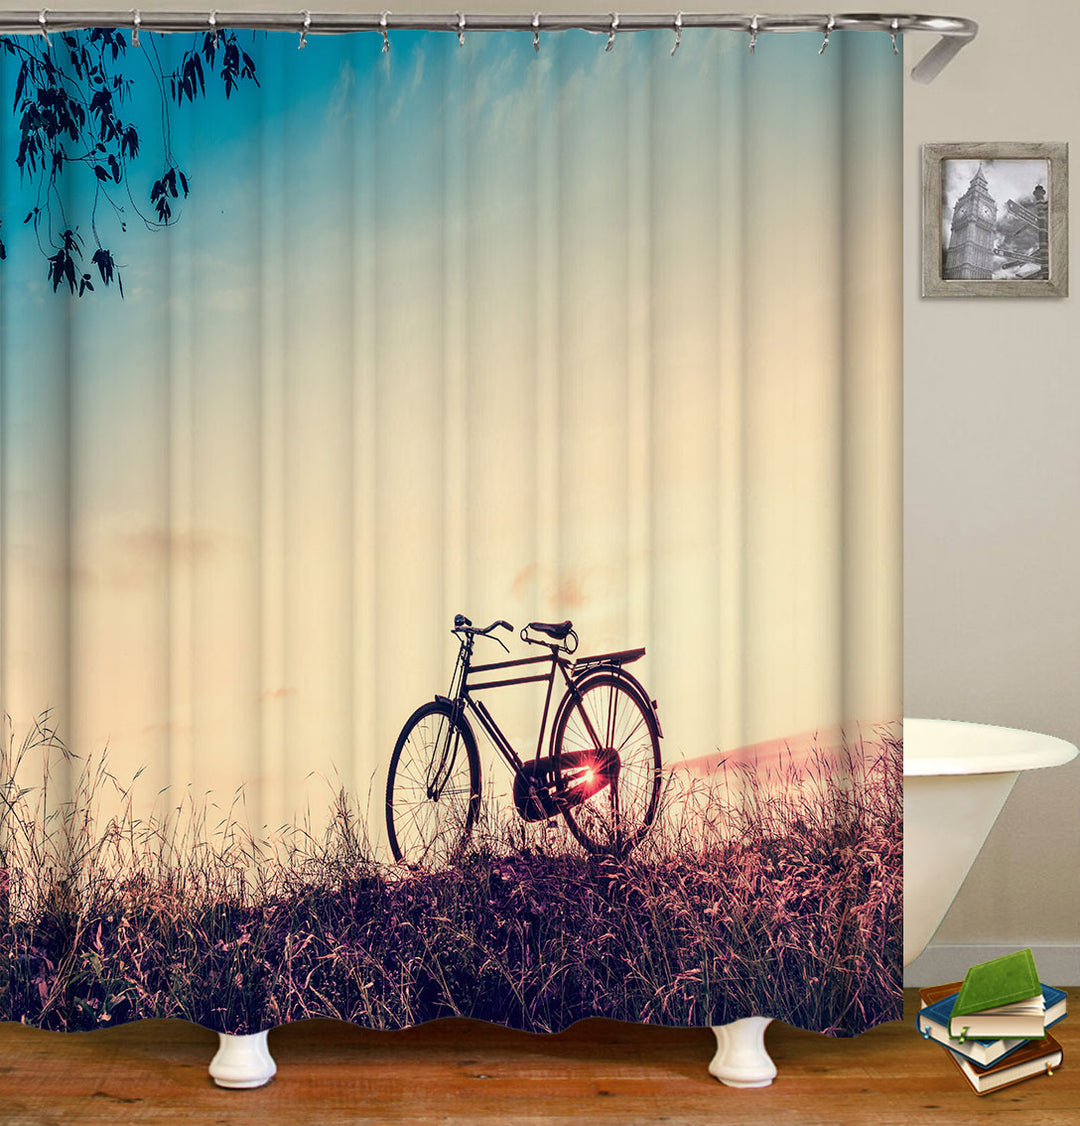 Bicycle Shower Curtain Cycling at Sunset